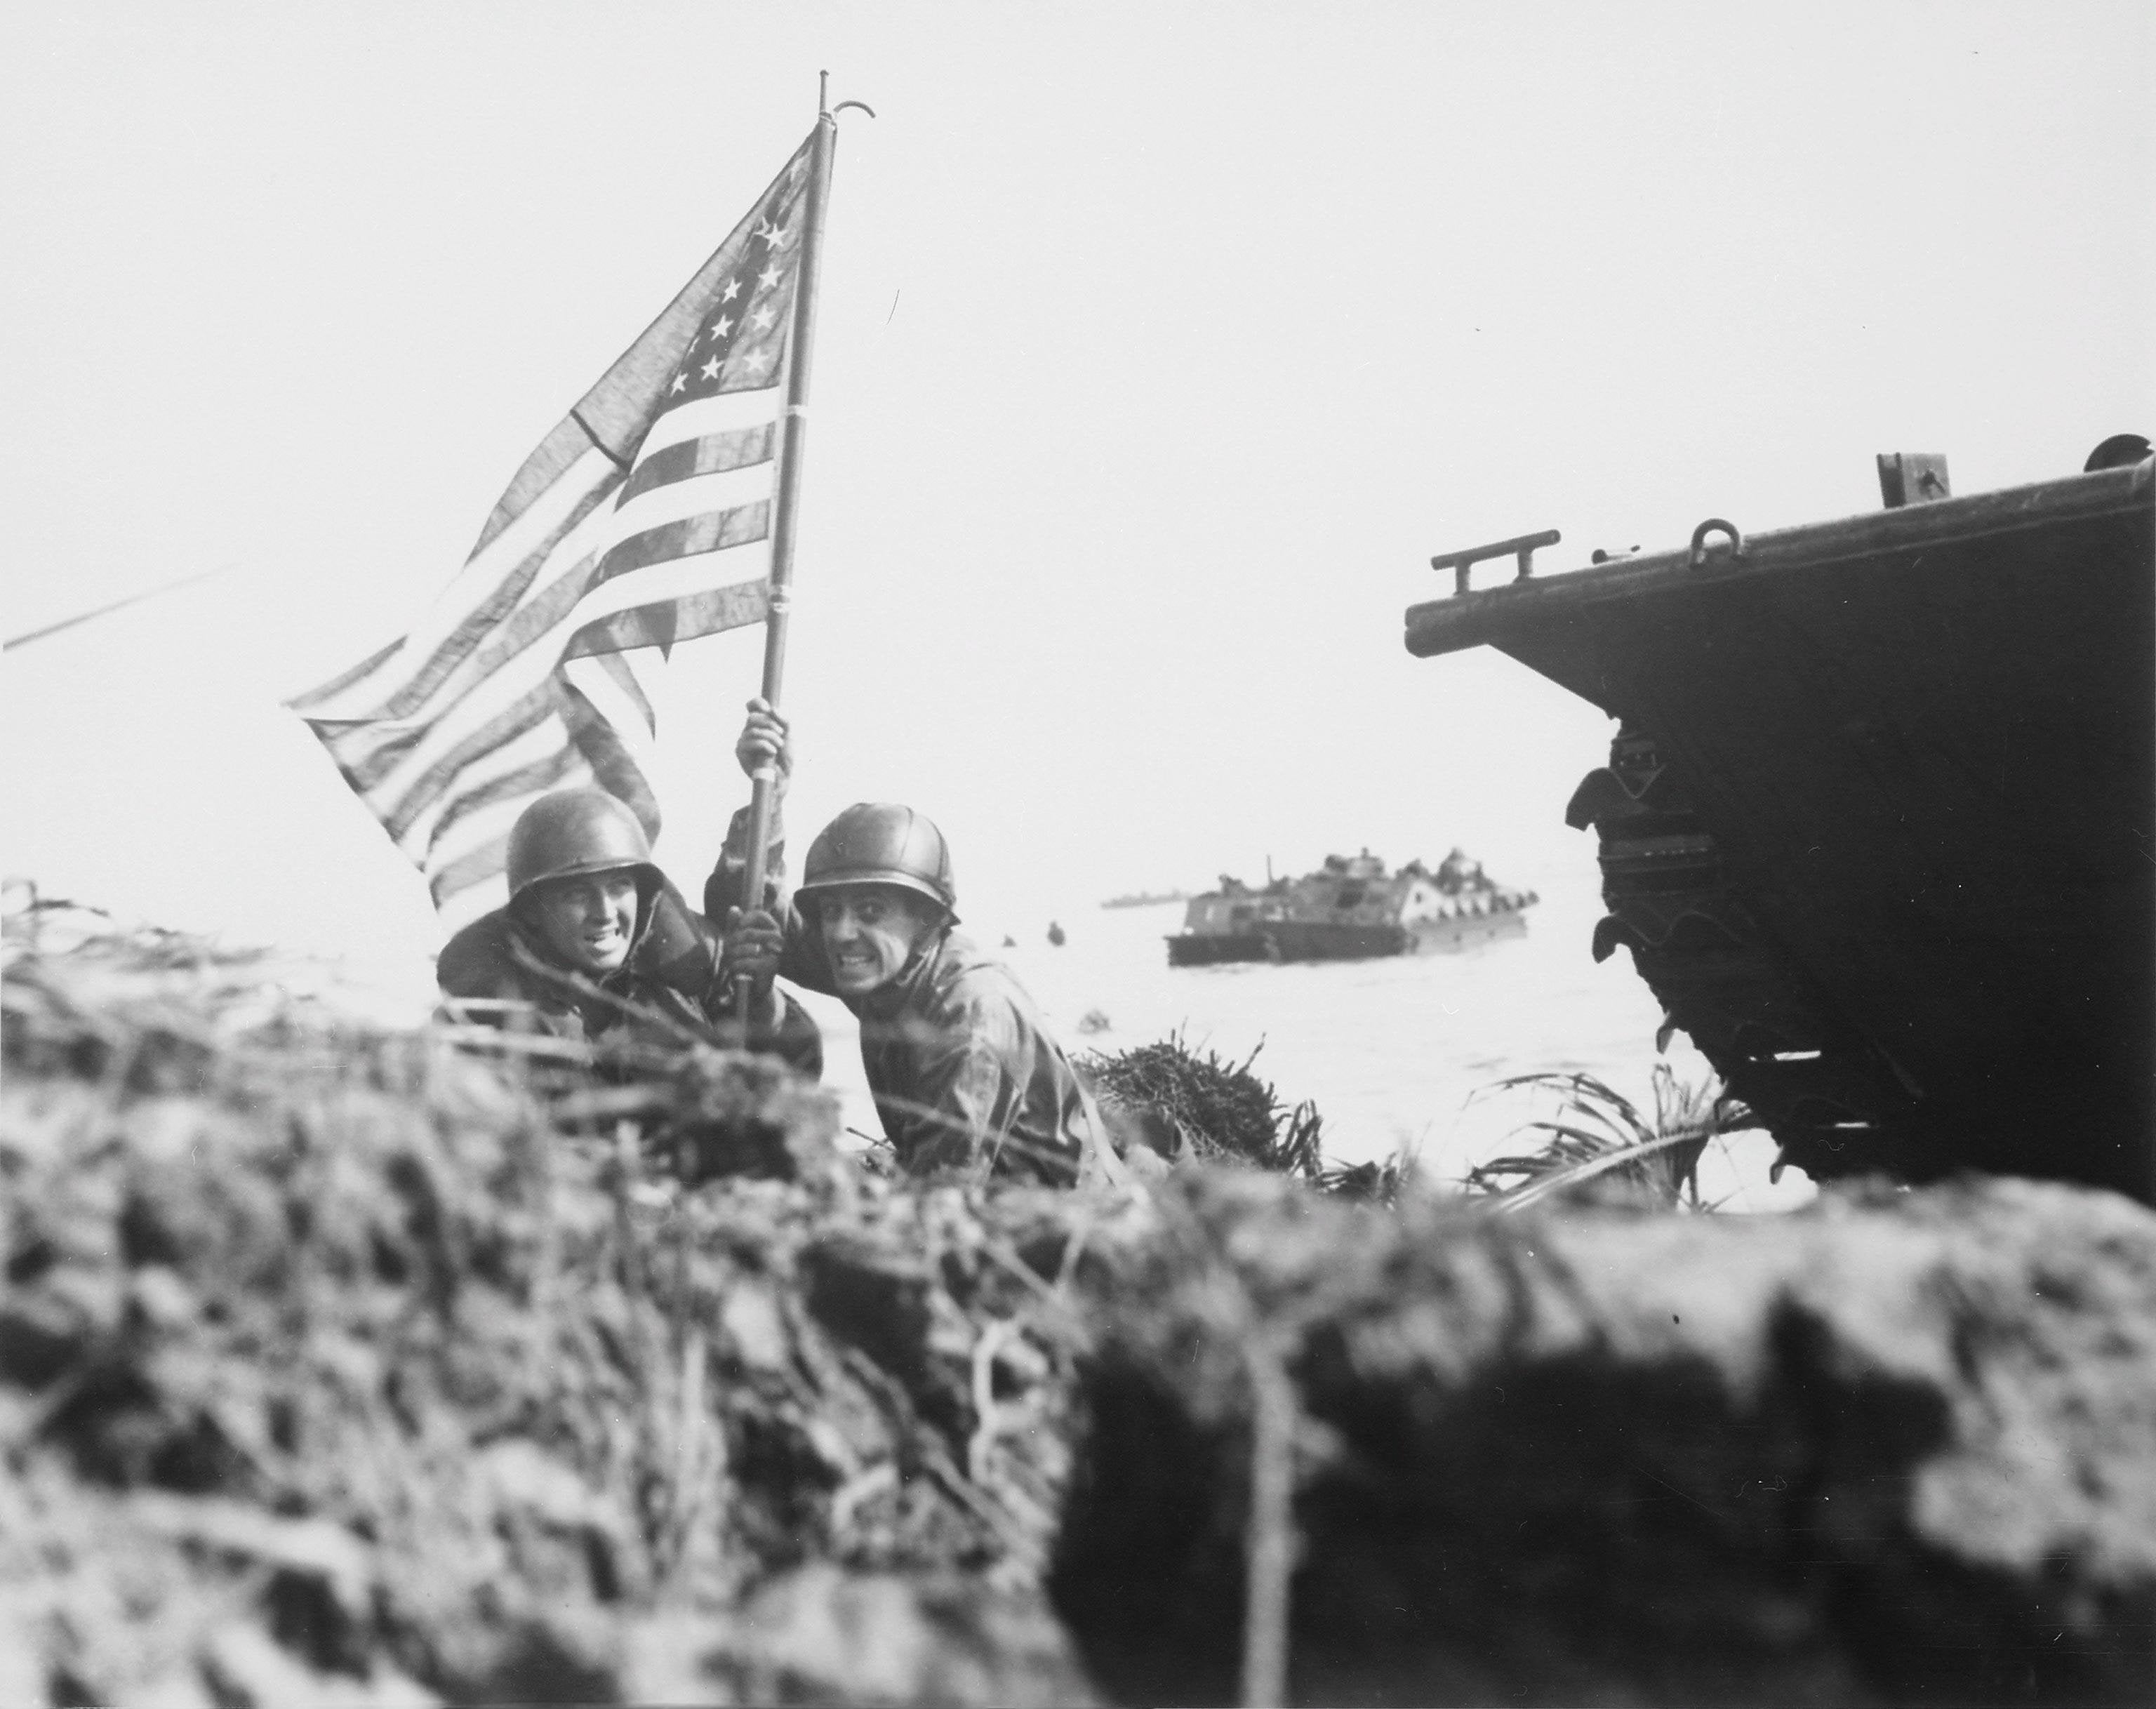 First flag on Guam on boat hook mast. Two U.S. officers plant the American flag on Guam eight minutes after U.S. Marines and Army assault troops landed on the Central Pacific island on July 20, 1944.